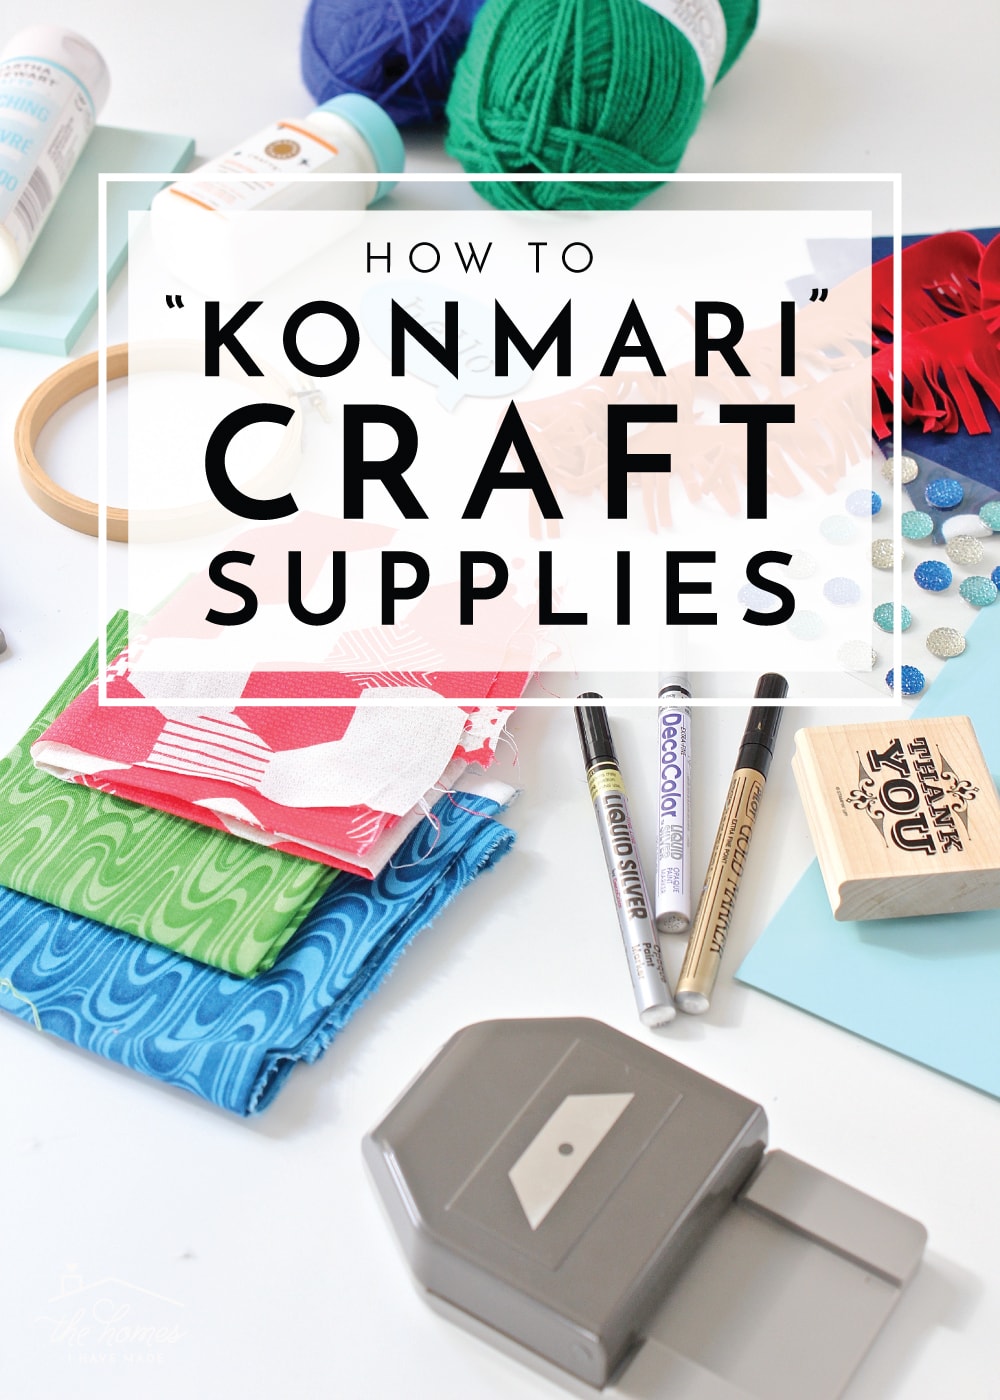 By their very nature, craft supplies "spark joy," so how do you determine what to keep and what to purge? Use these tips for how to KonMari craft supplies!